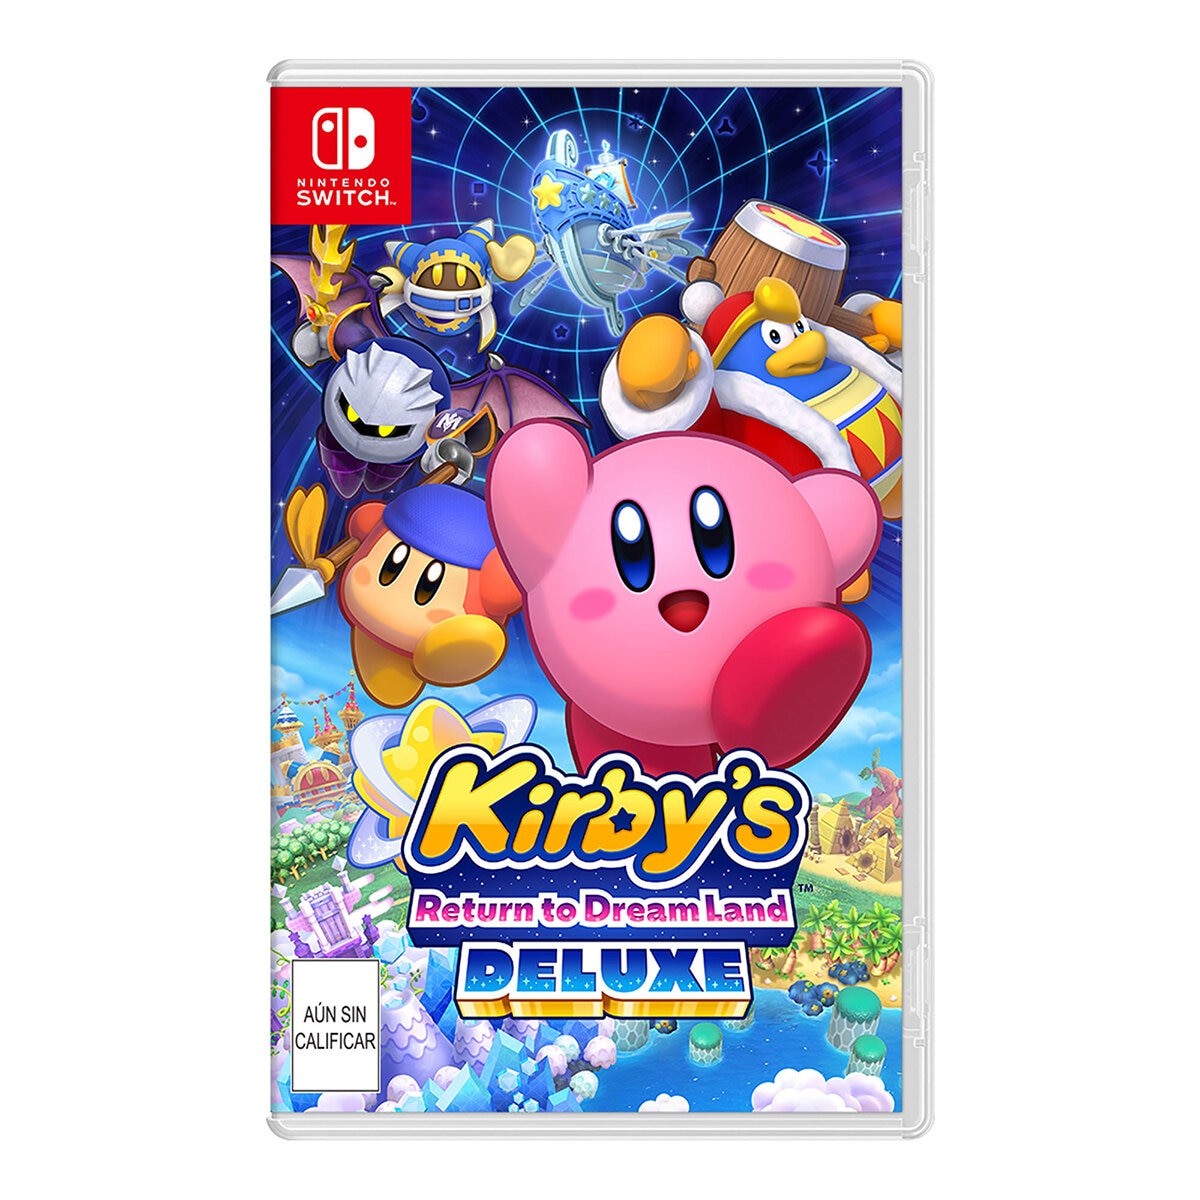 Kirby and the Forgotten Land - NINTENDO SWITCH, Juegos Digitales Chile